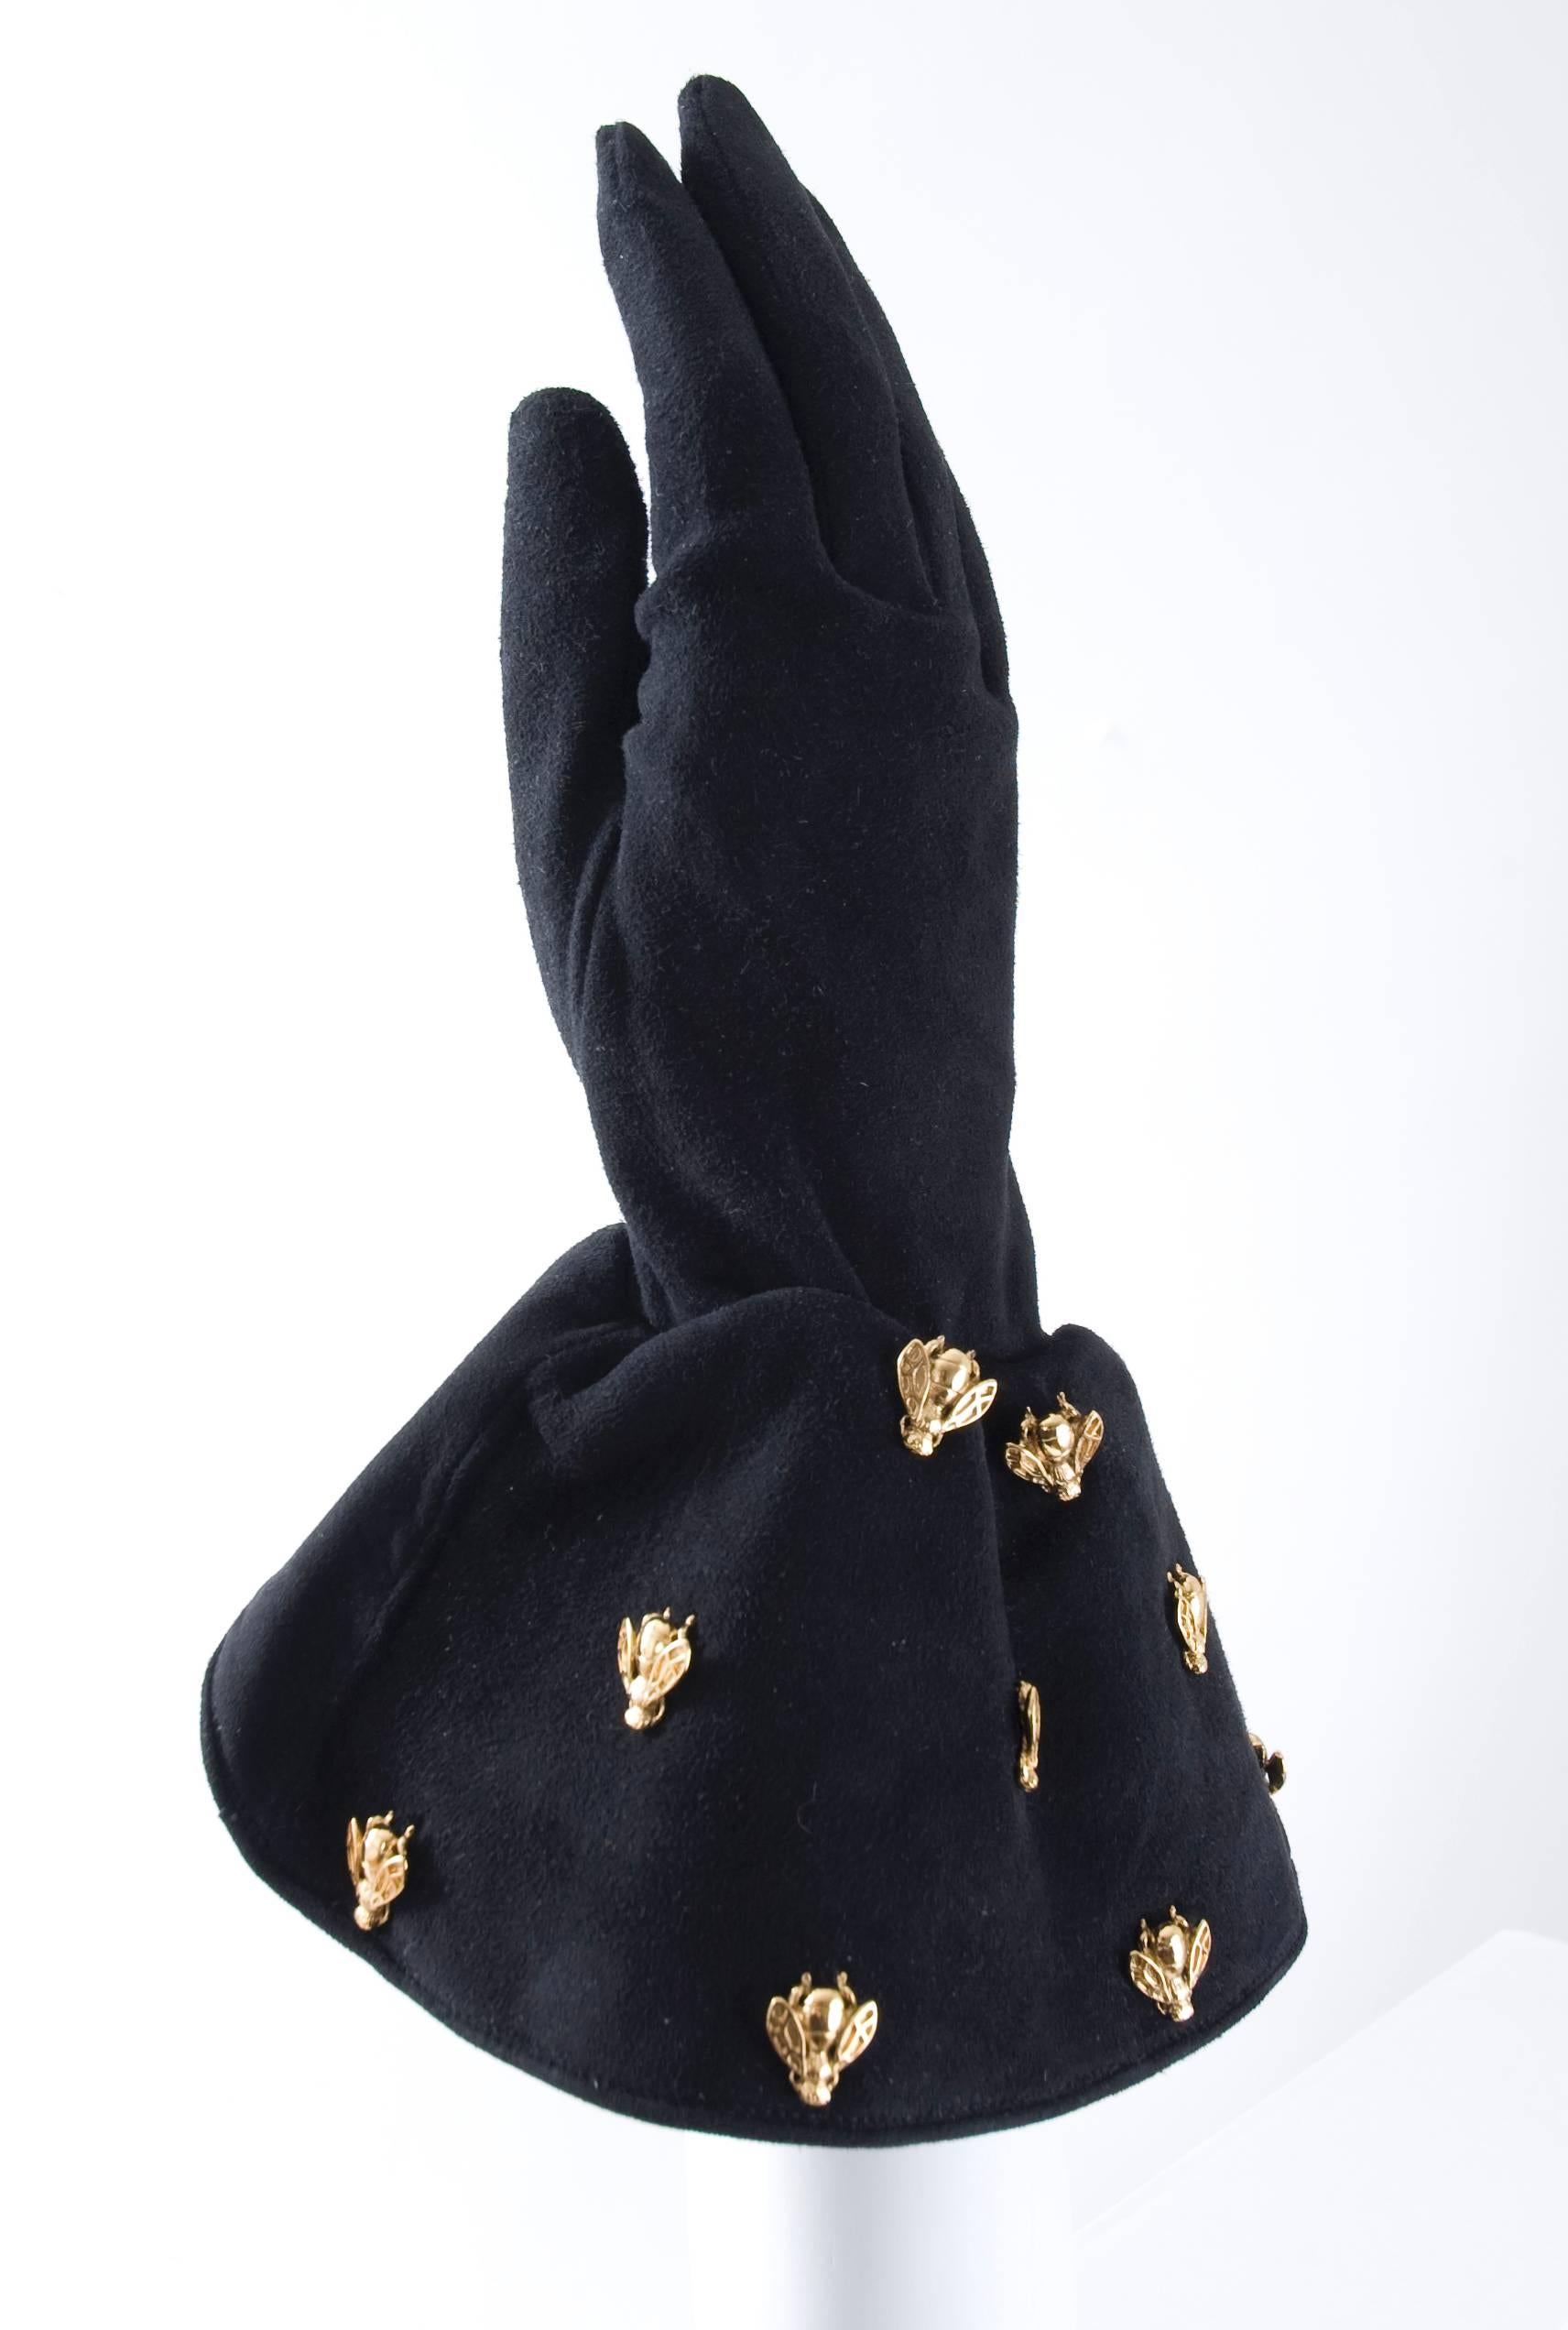 Vintage Christian Dior Boutique Black Suede Gloves Embelished with  Bee's In Excellent Condition For Sale In Hamburg, Deutschland